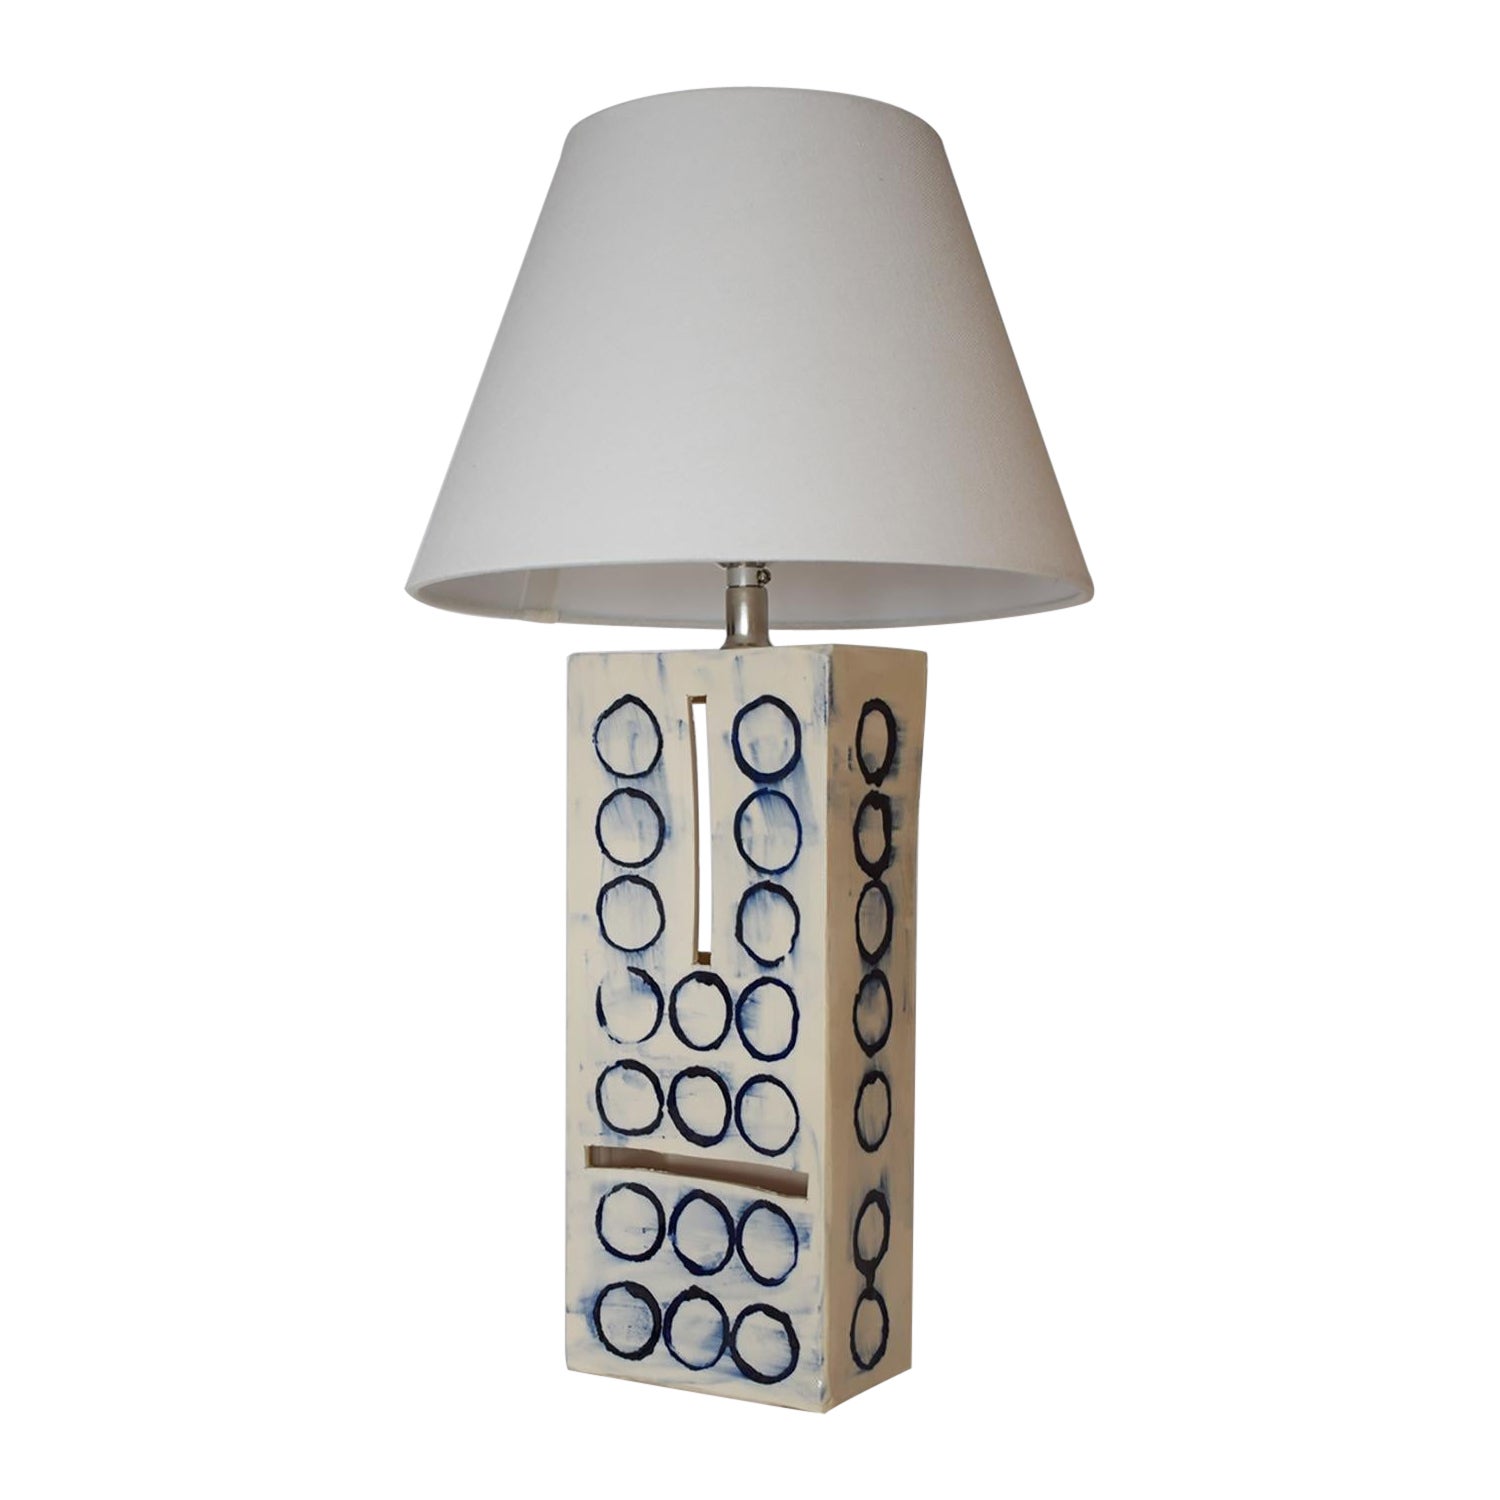 Customizable Hand-Painted Ceramic "Cobalt Totem" Lamp by James Hicks For Sale